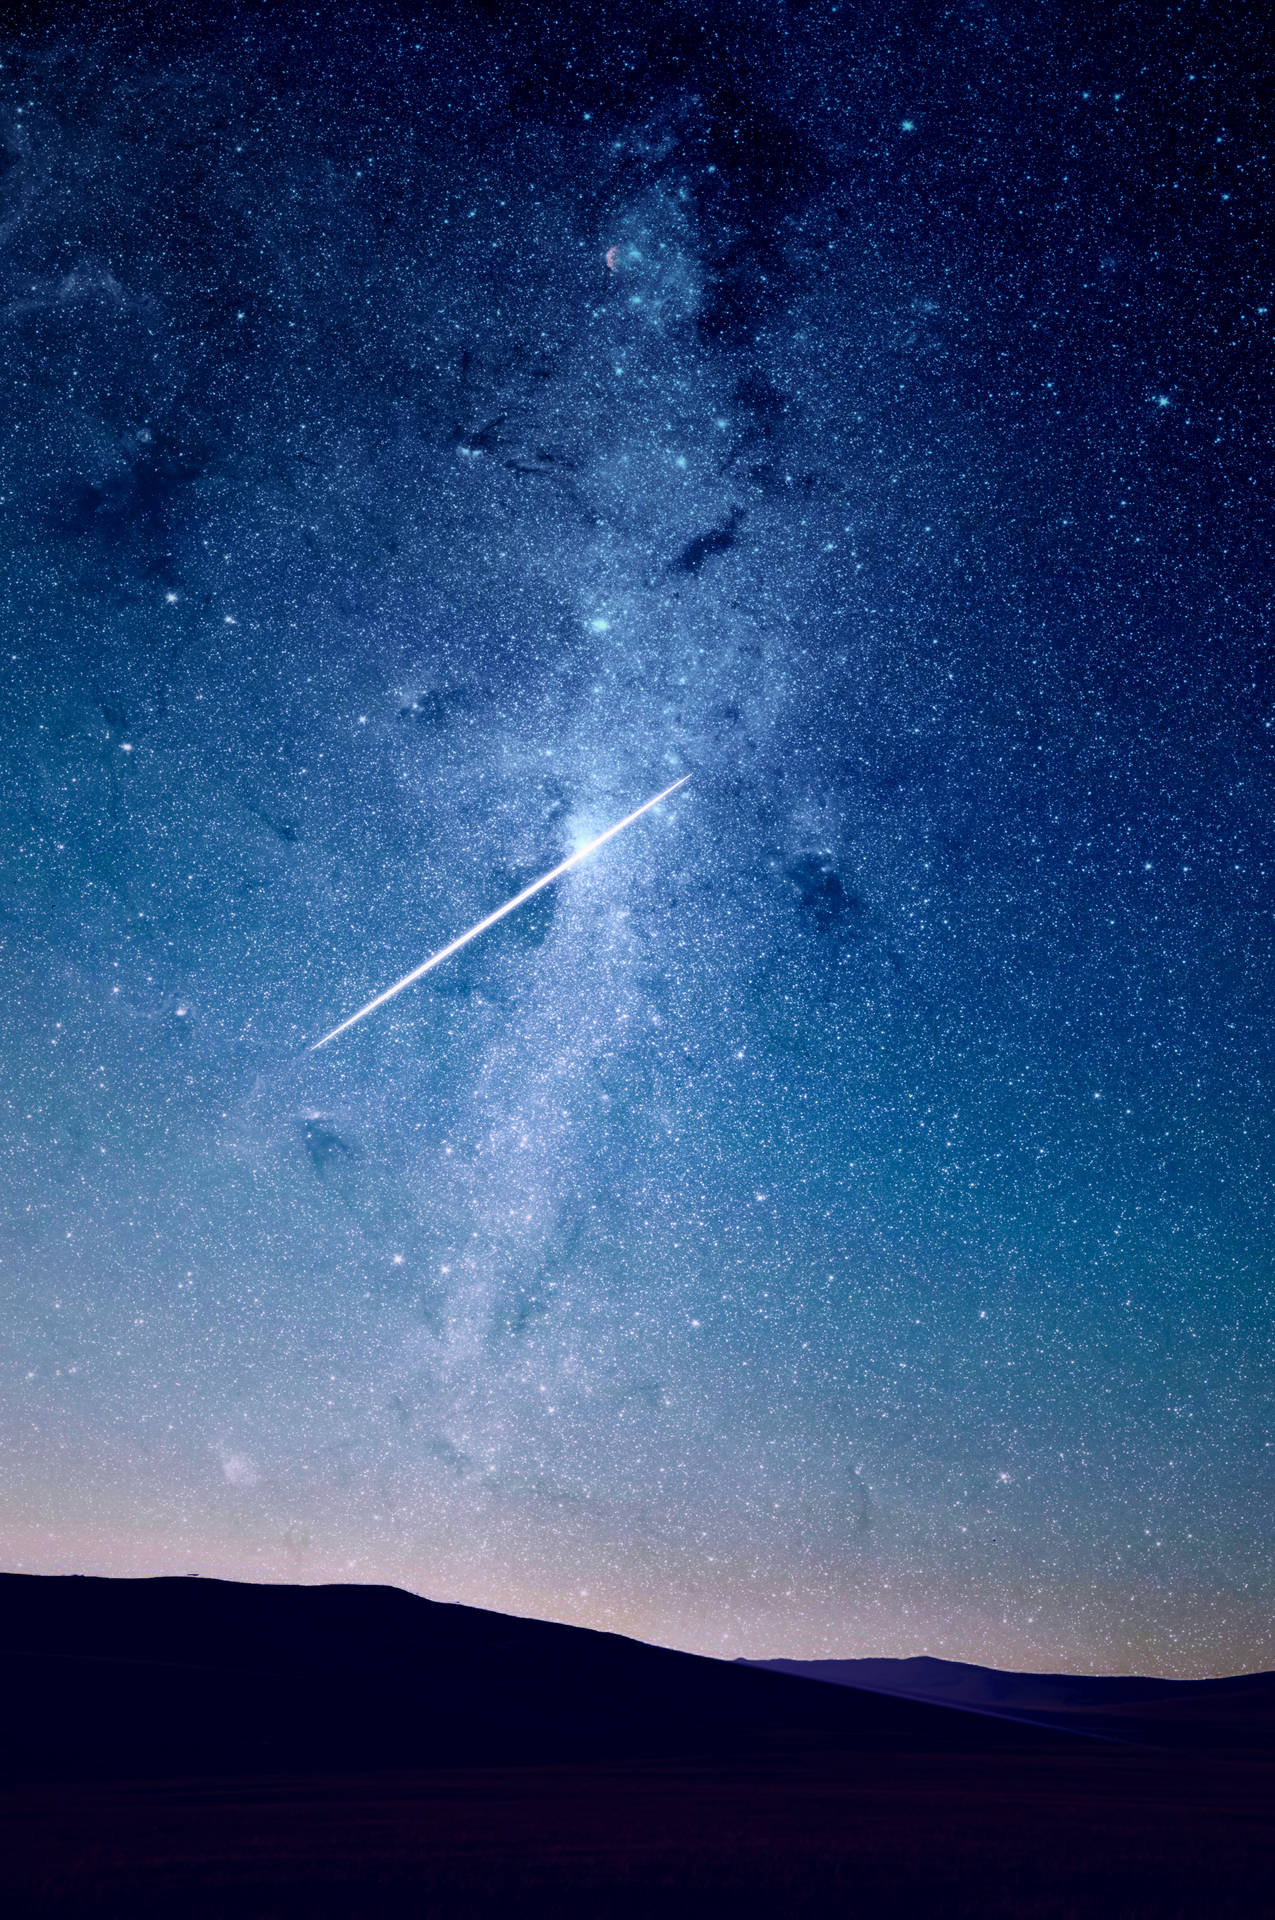 Shooting star with white tail on the blue night sky filled with glowing stars of different sizes. 